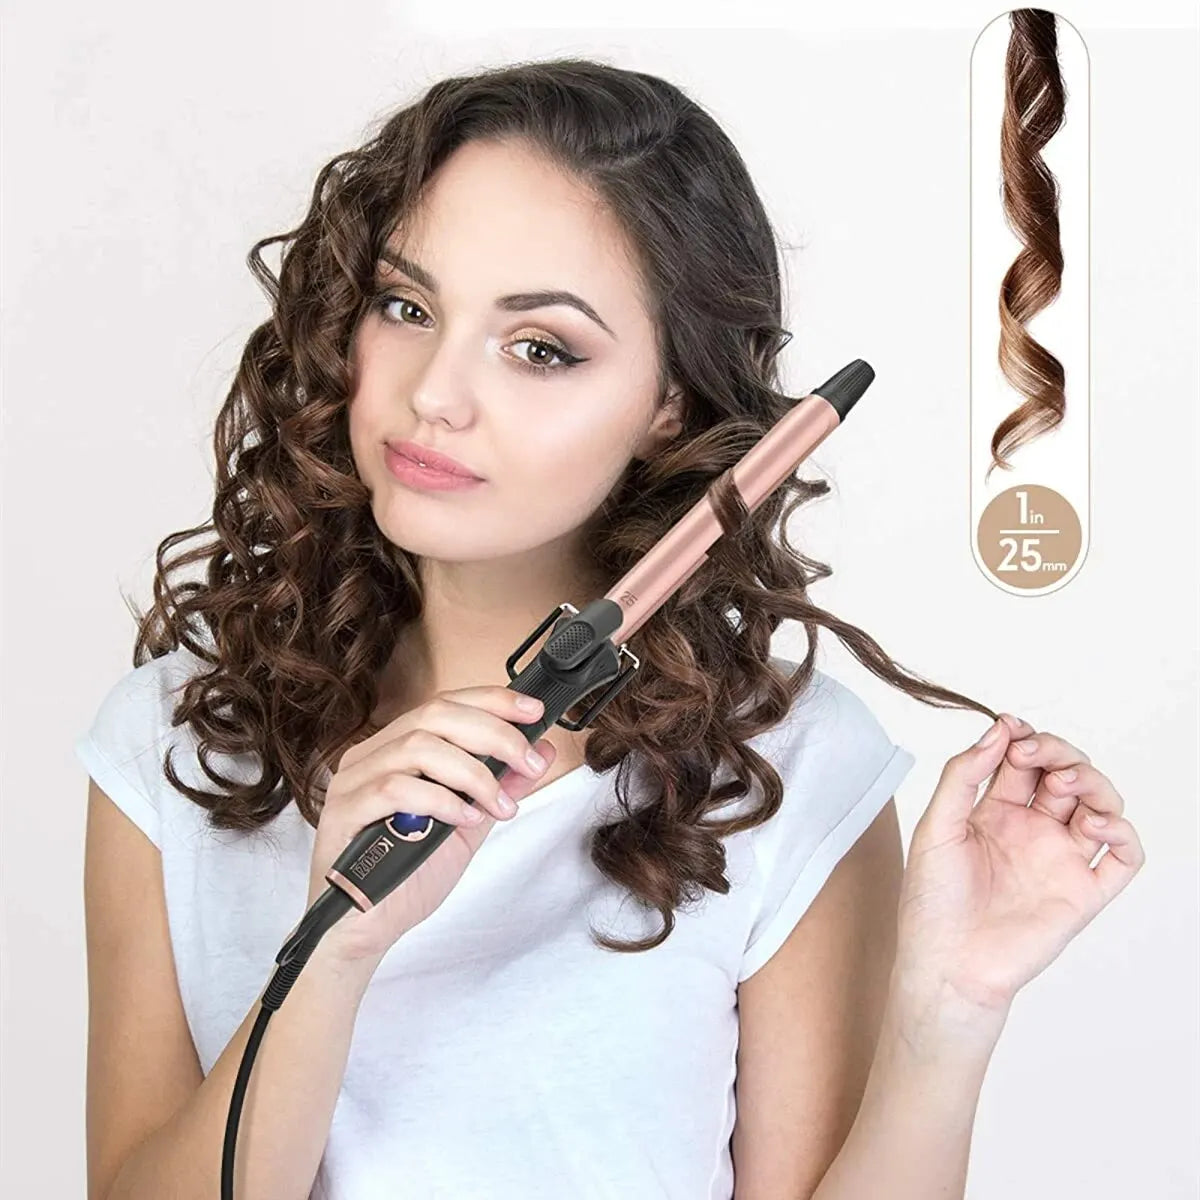 25mm Professional Instant Heating Hair Curling Iron - Accessory Monk